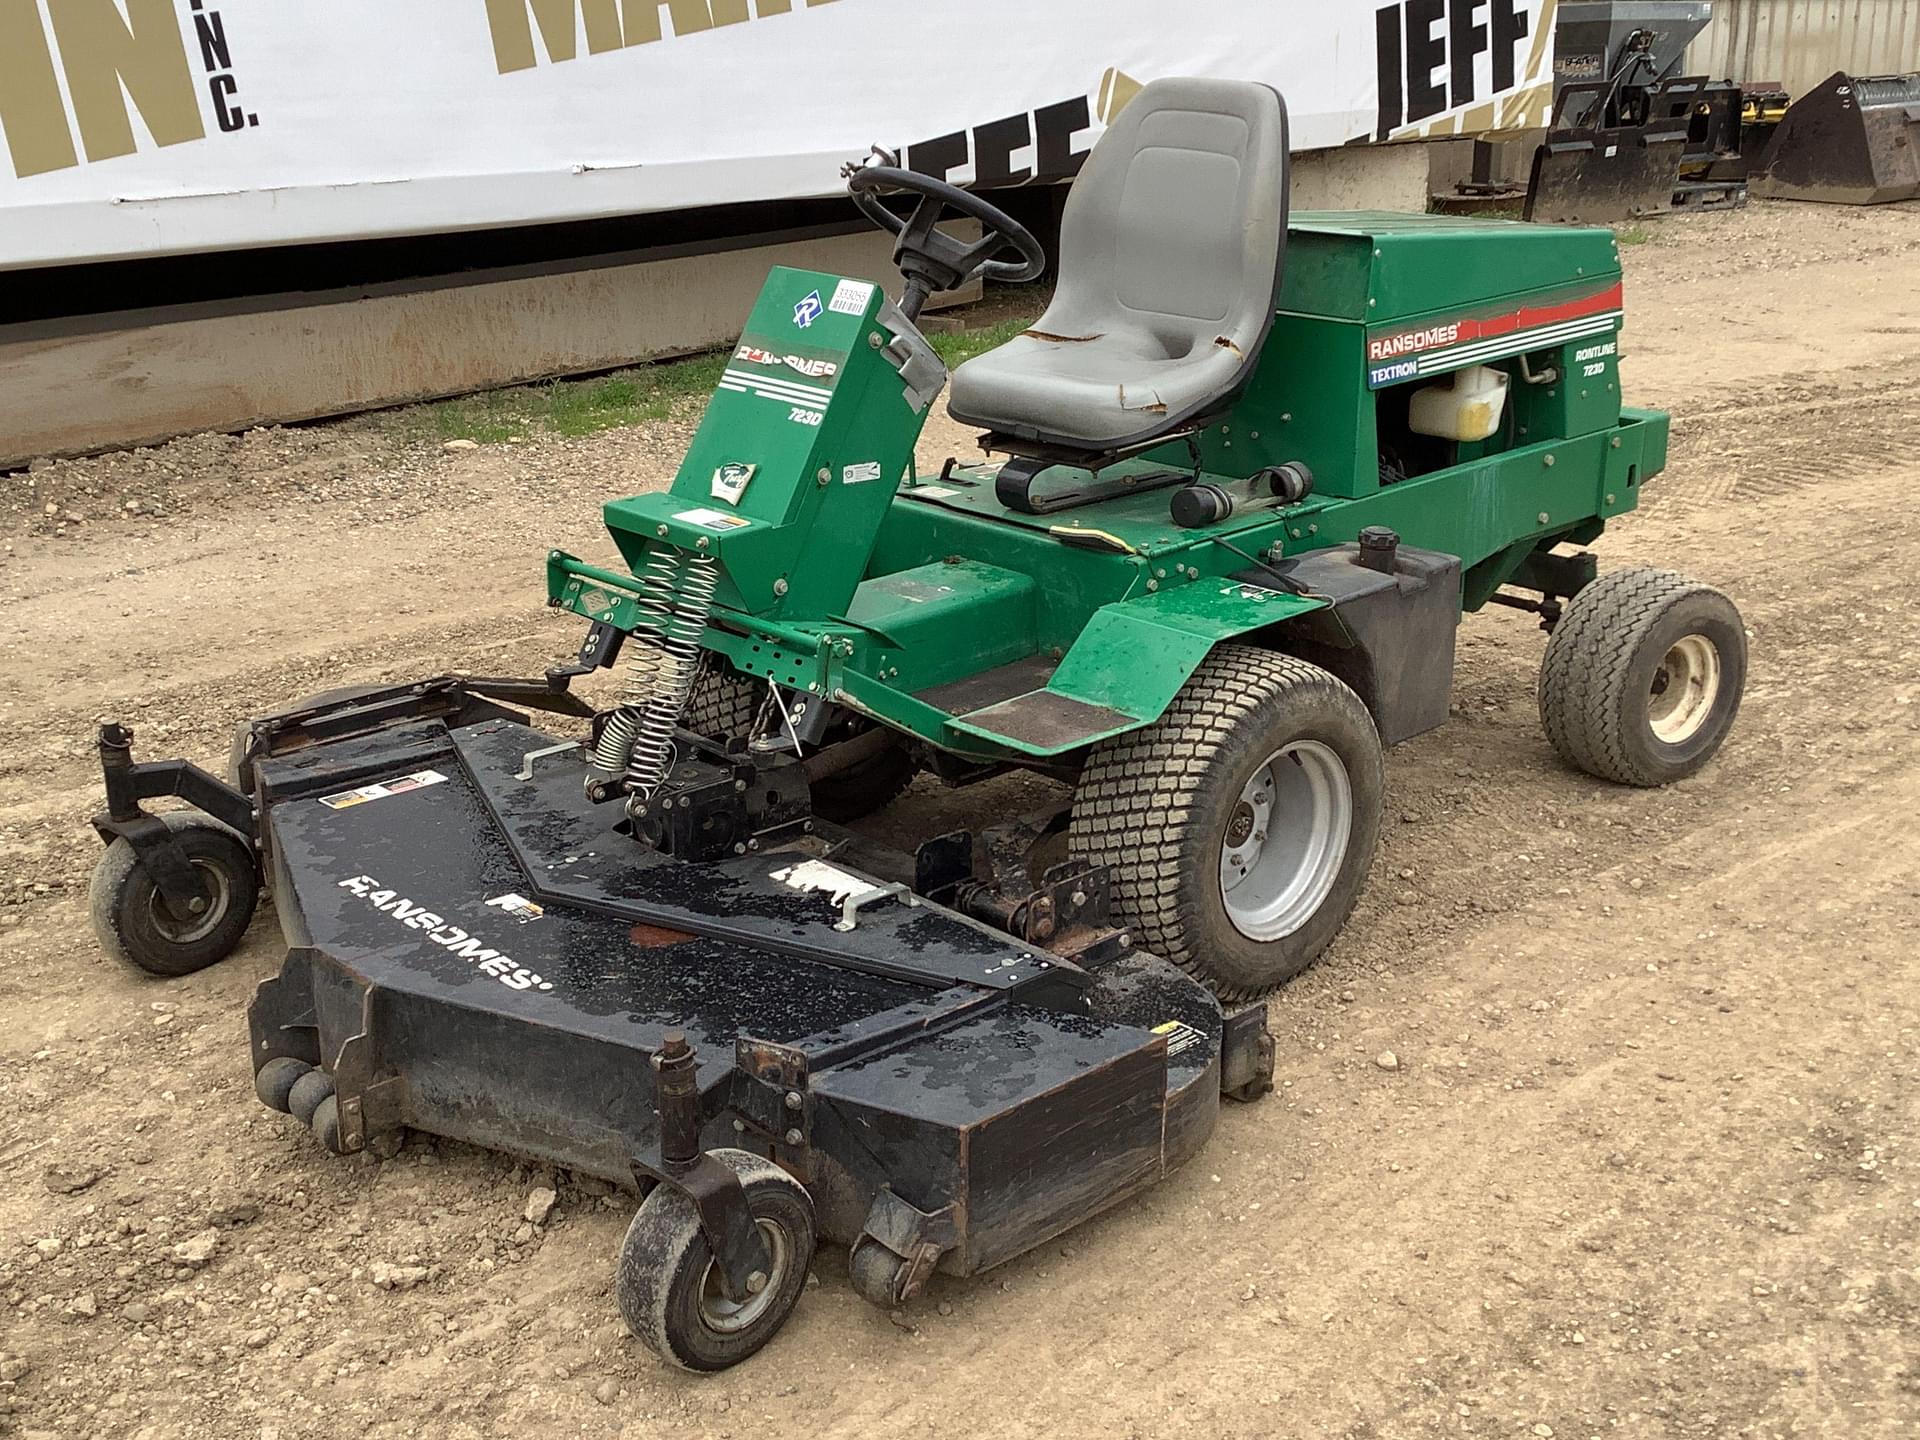 Main image Ransomes 723D 0